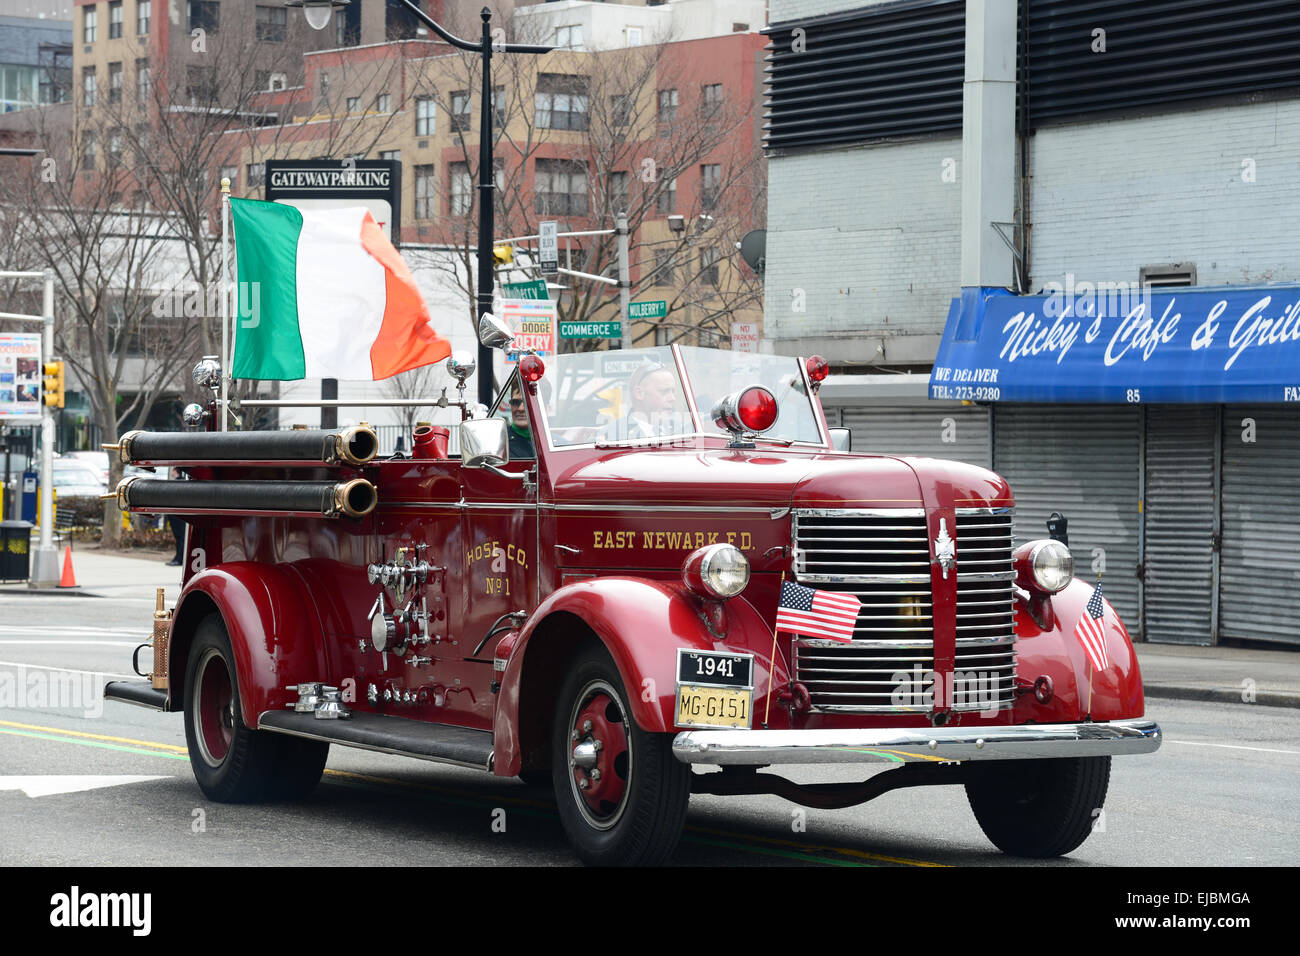 East Newark vintage fie department car during the 2013 St. Patrick's Day parade in Newark, New Jersey. USA Stock Photo